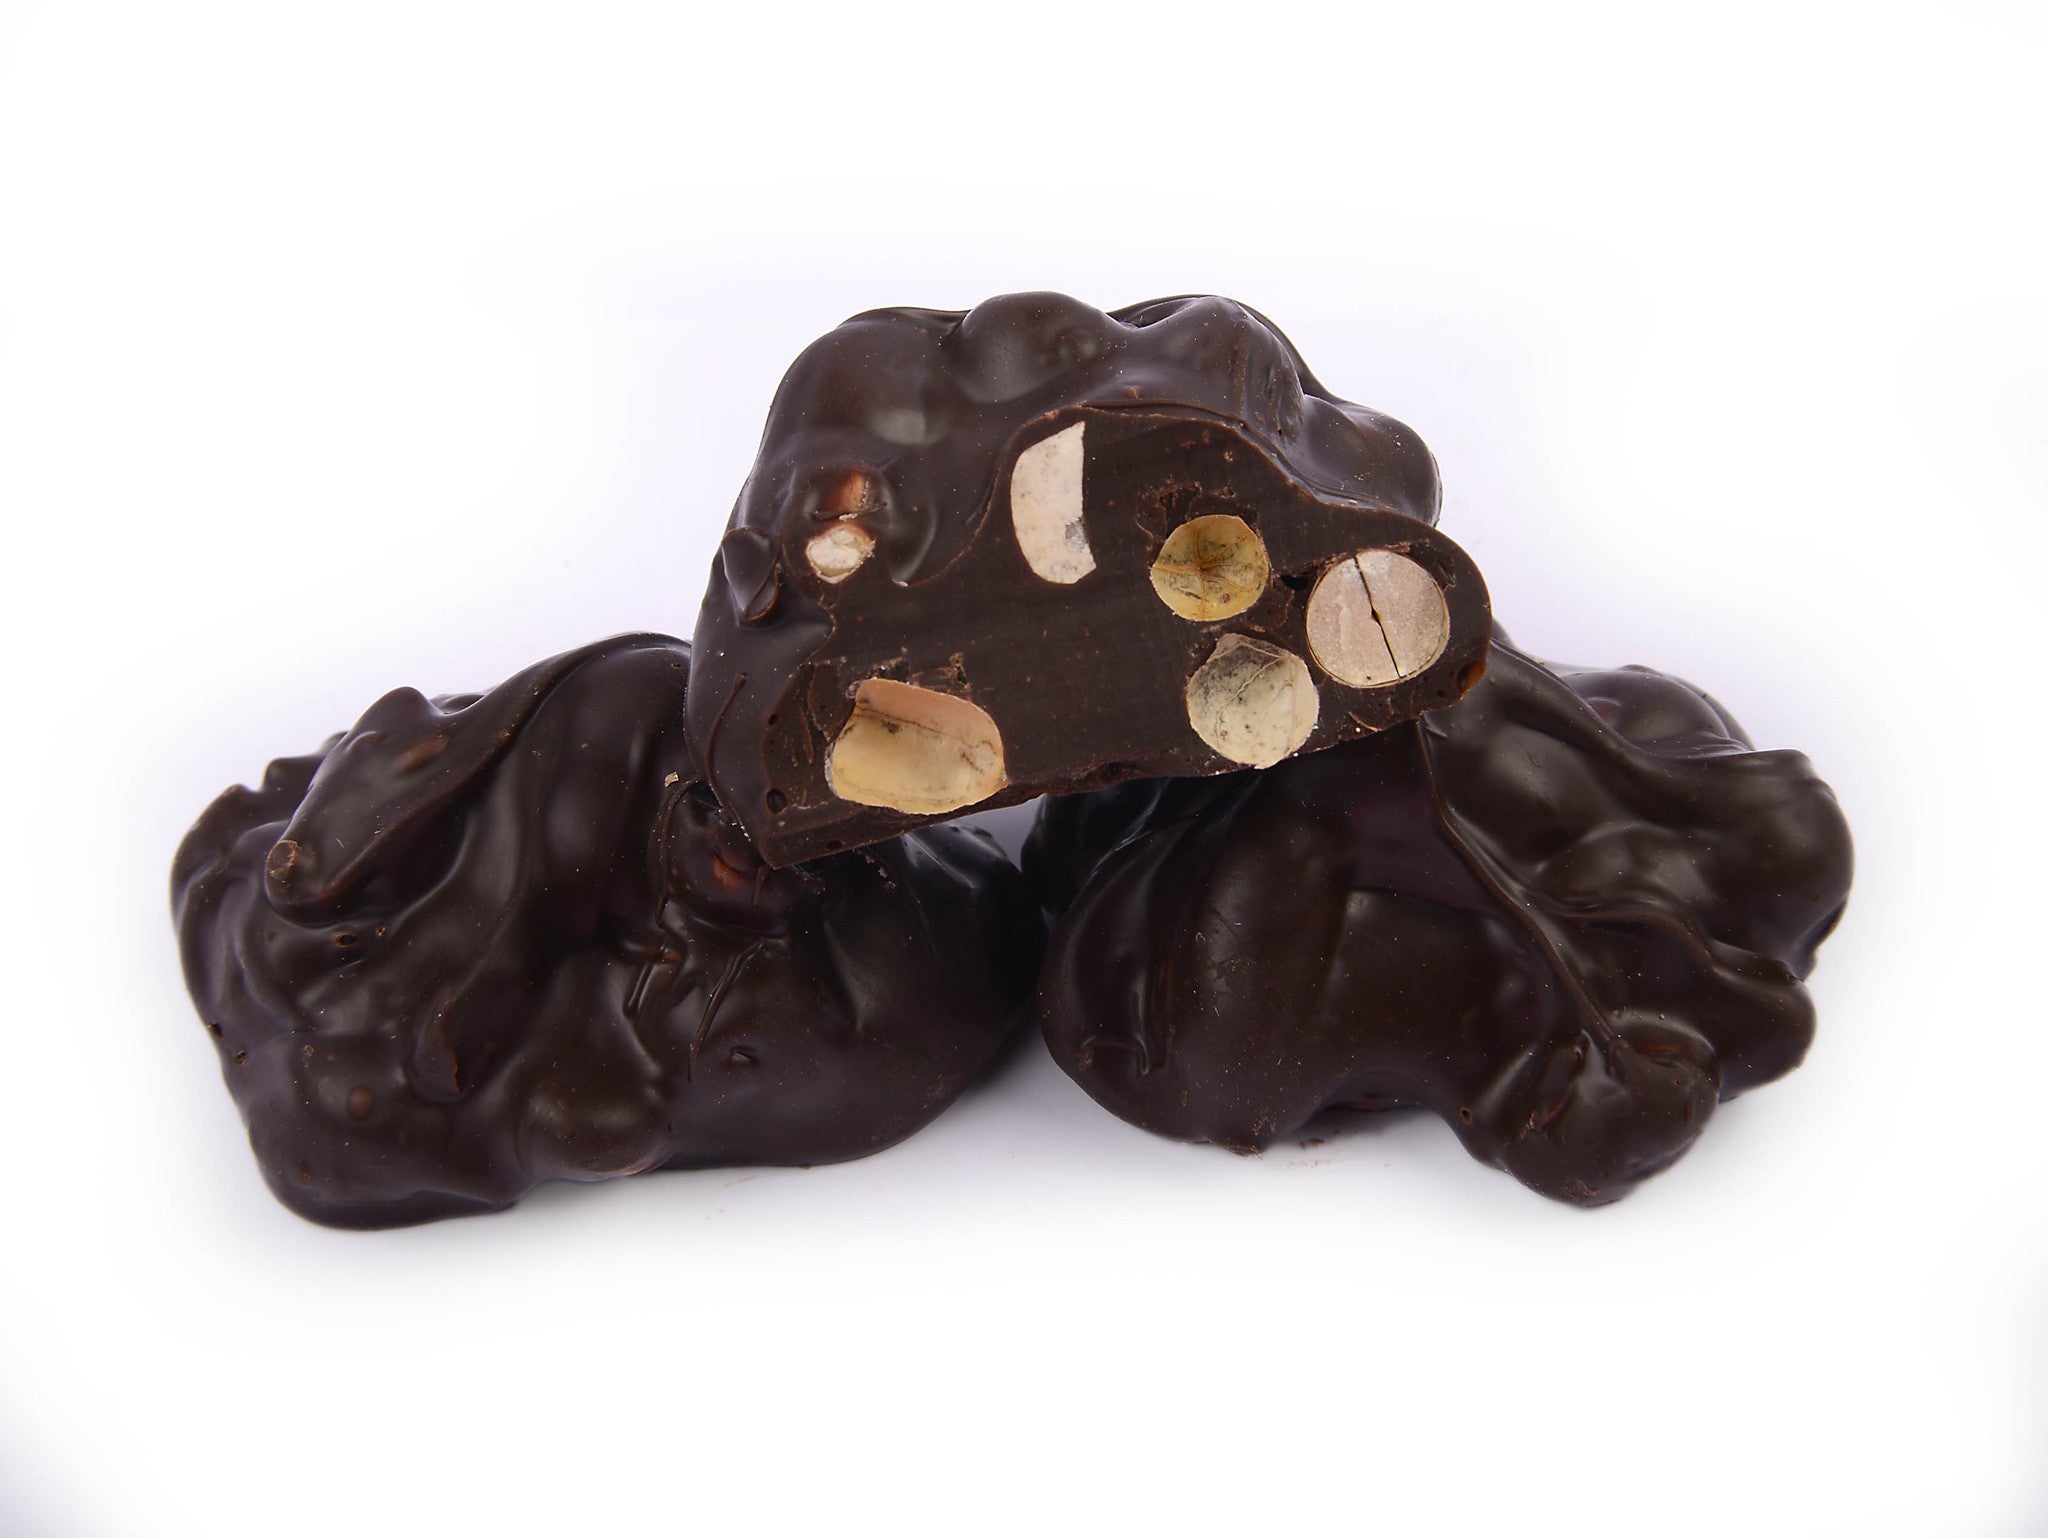 Milk Chocolate Peanut Clusters – Candy Kitchen Shoppes